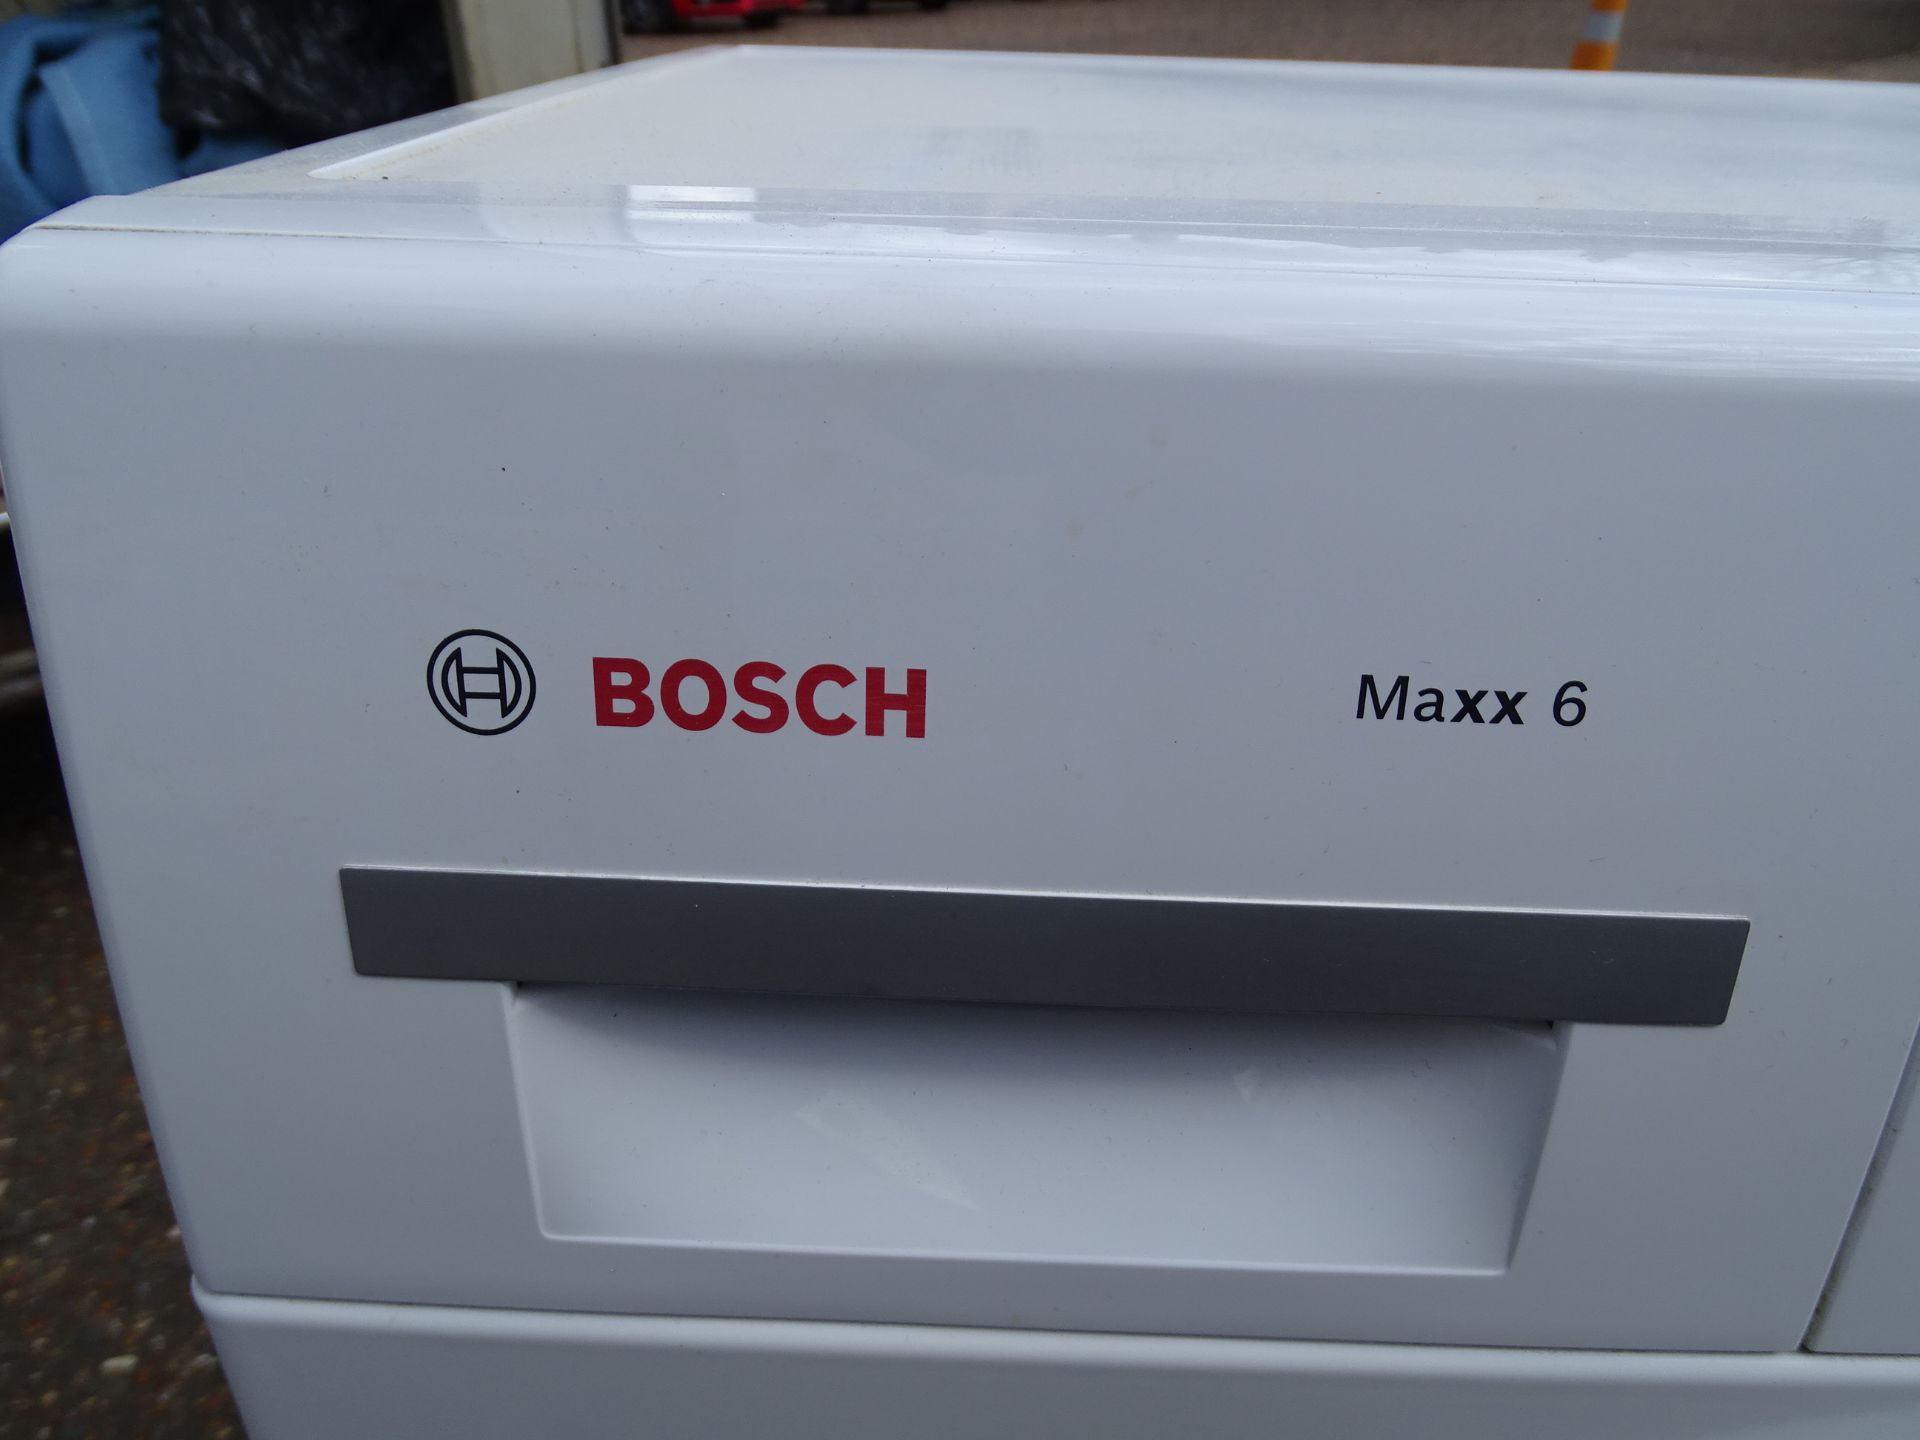 Bosch washing machine from a house clearance - Image 2 of 2